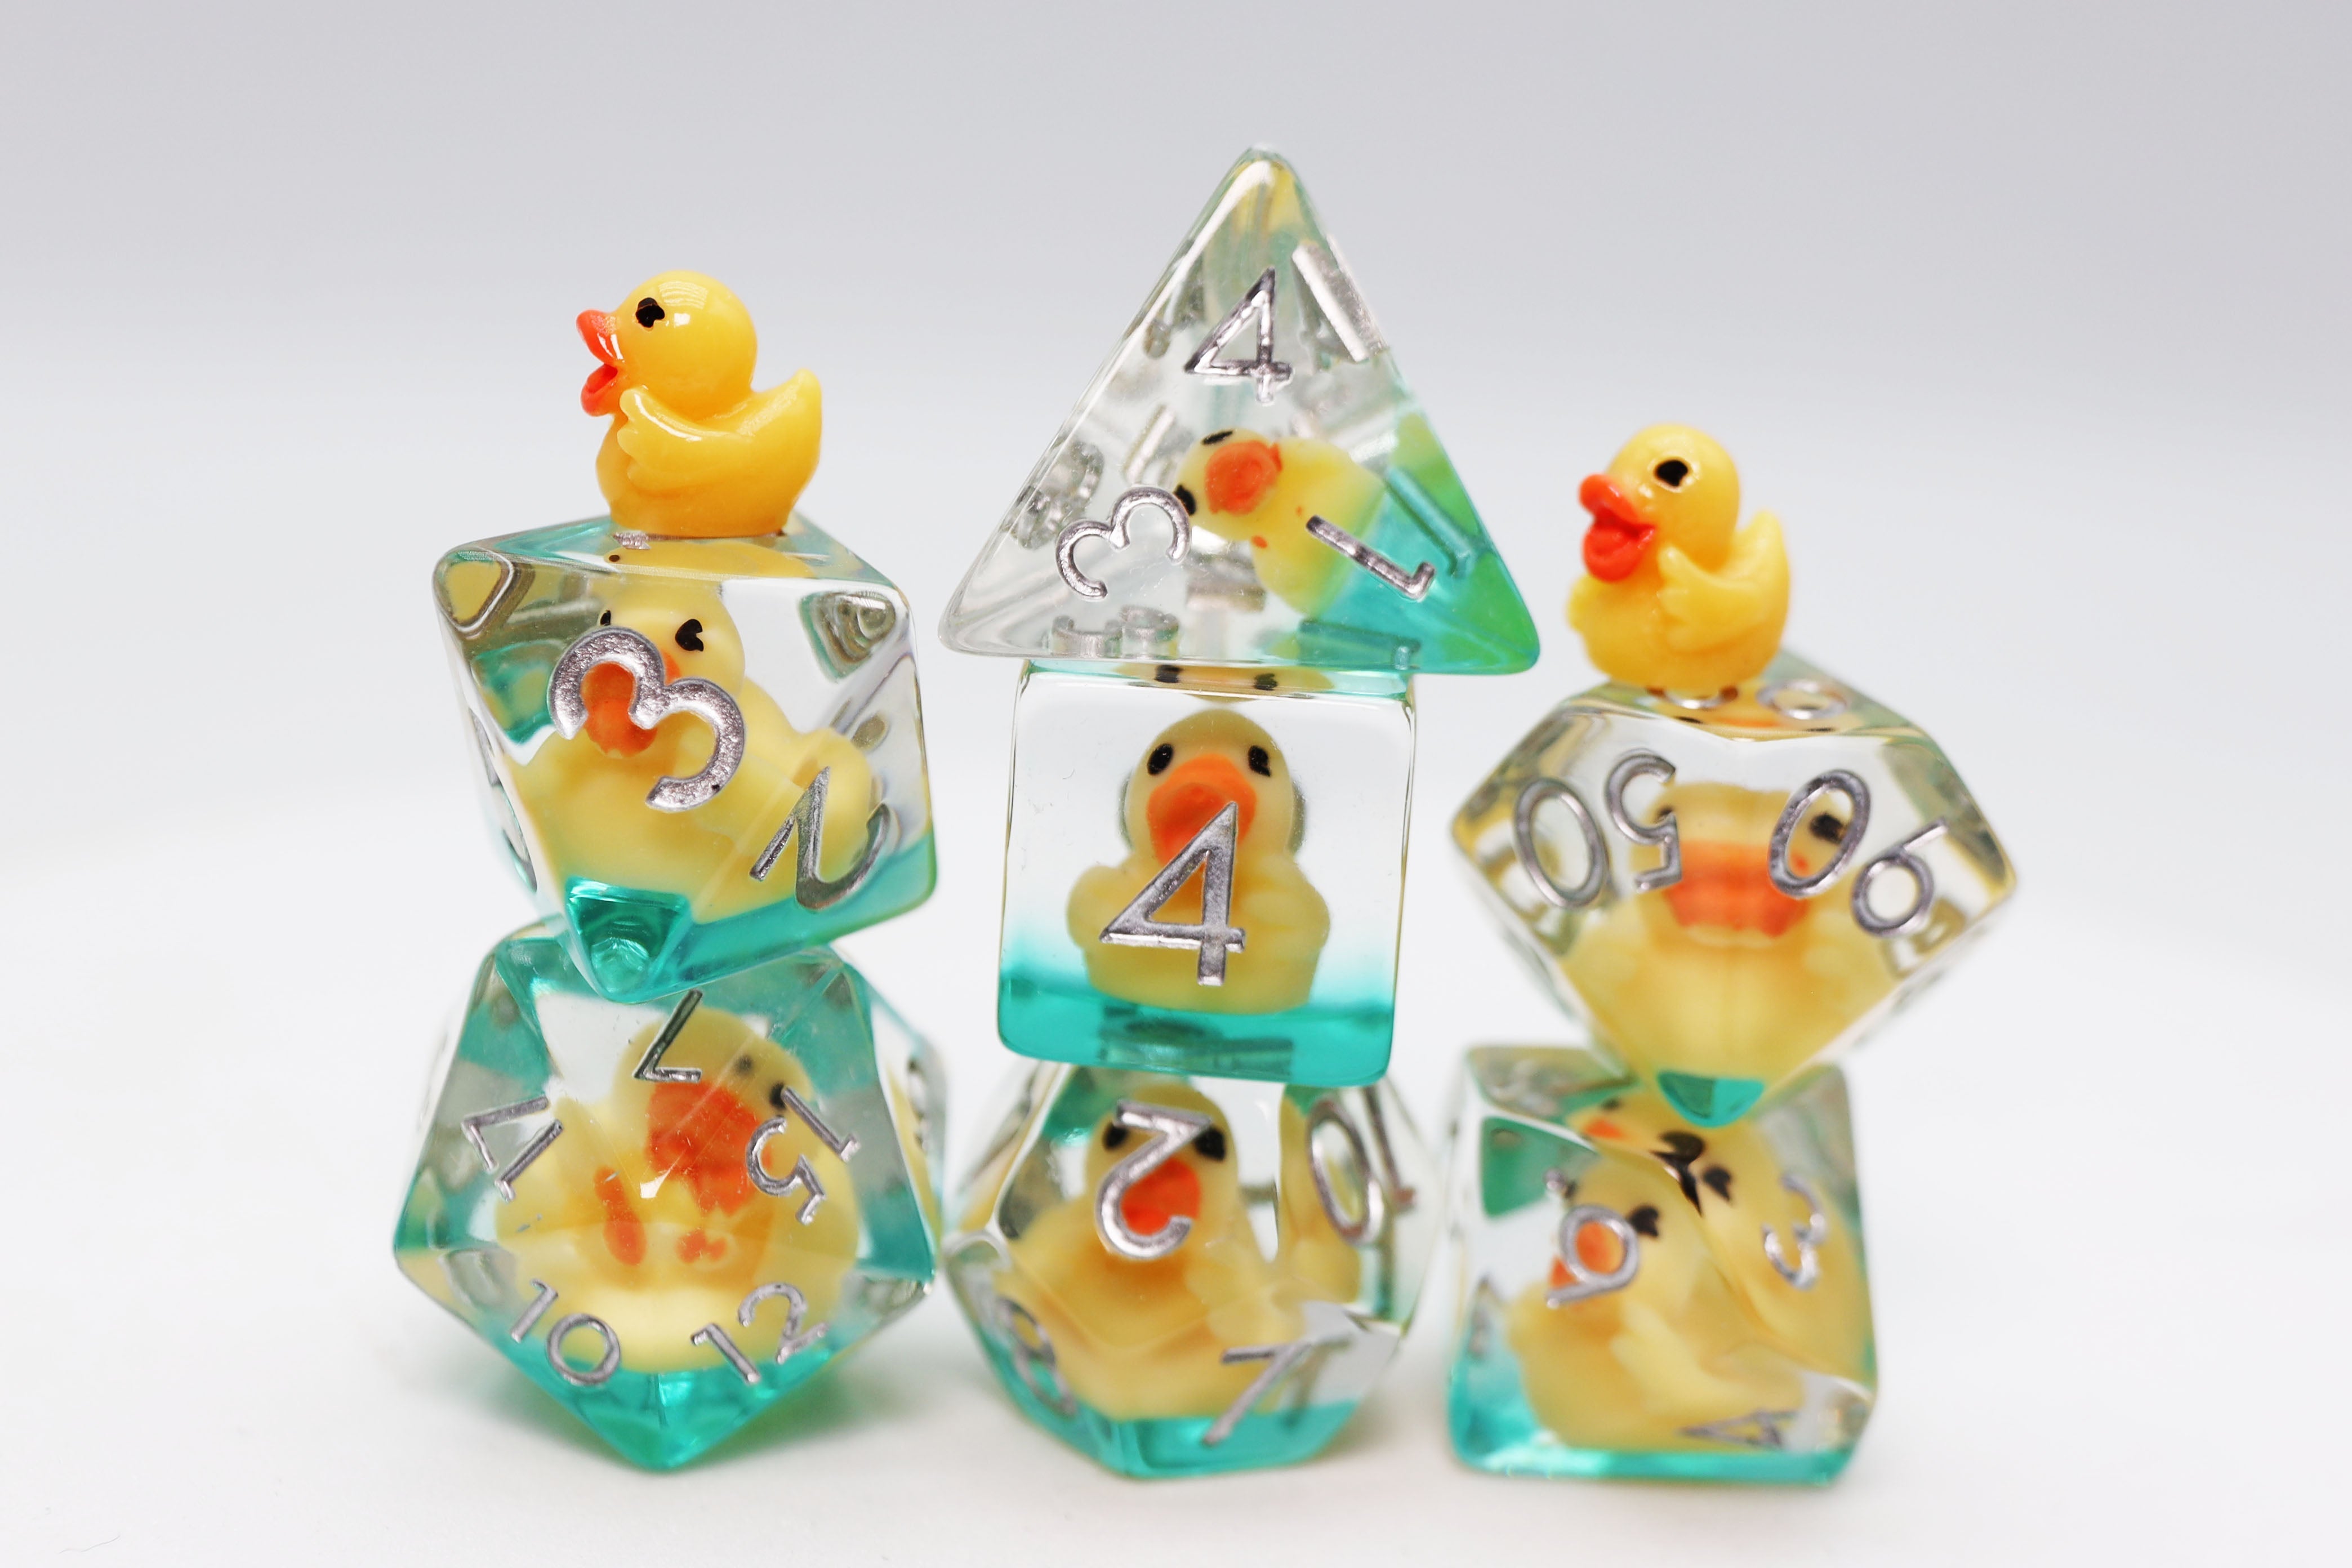 Rubber Duckie RPG Dice Set - Bards & Cards